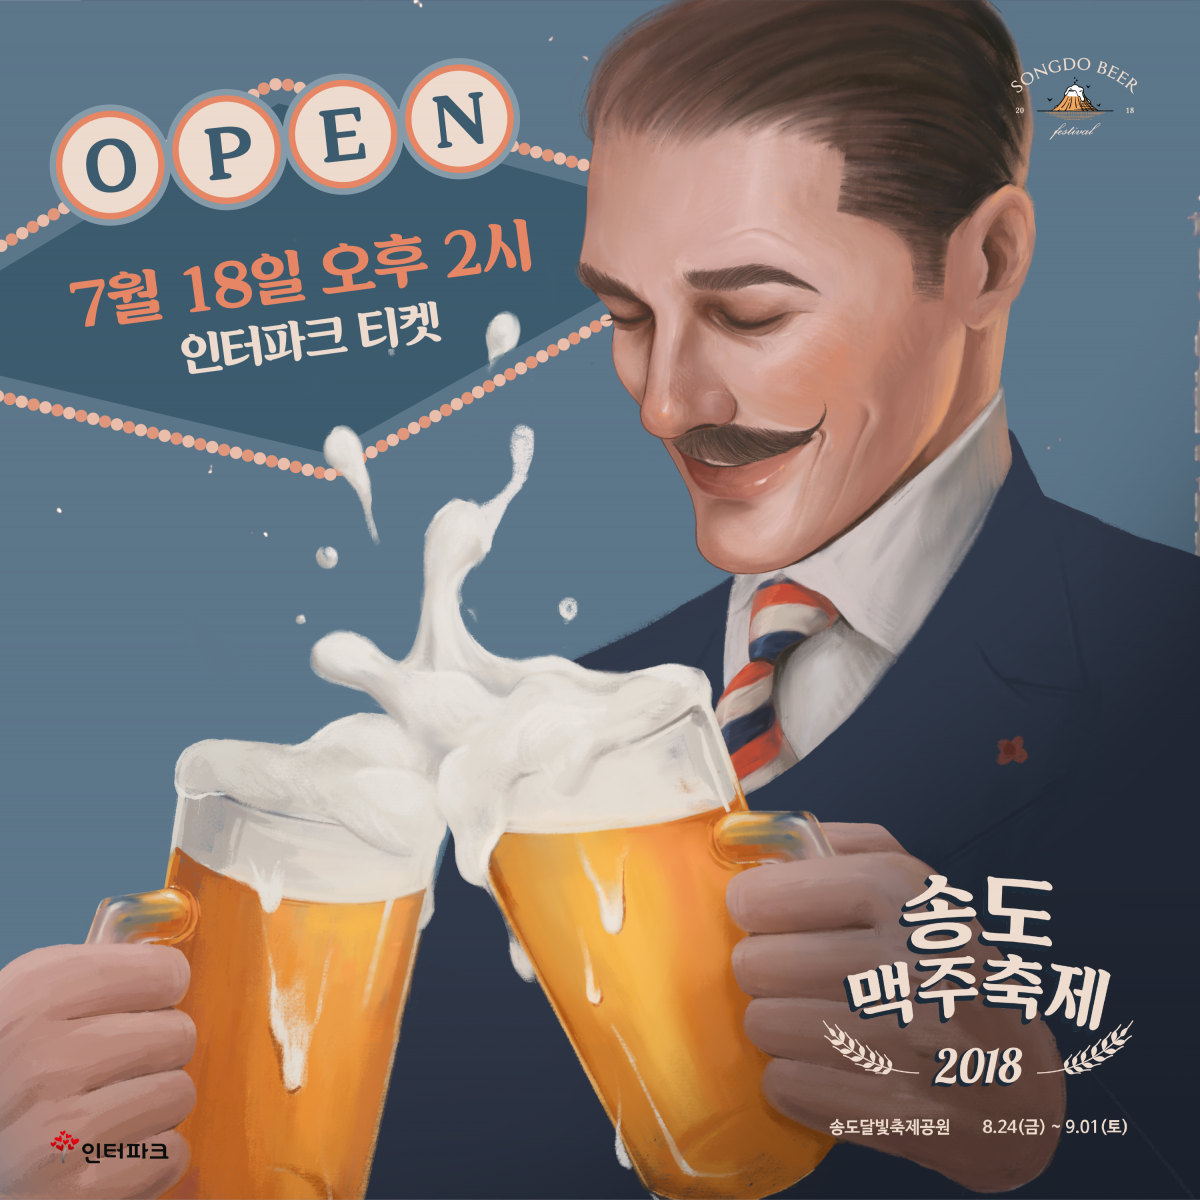 Music concerts, various events awaiting beer lovers in Korea